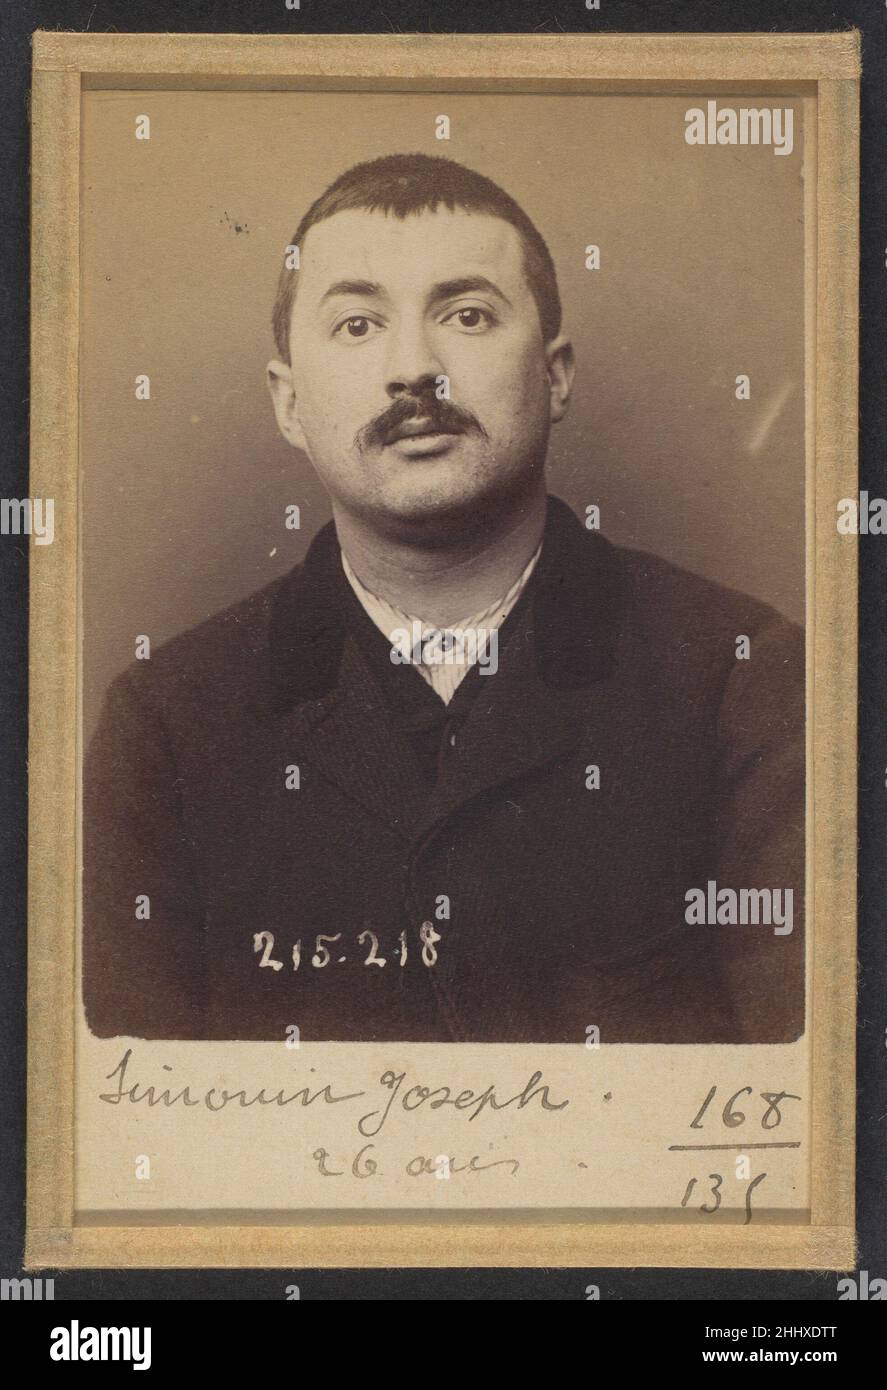 Simonin. Joseph. 26 ans, né à Saint-Maurice (Seine). Gainier. Anarchiste. 6/3/94. 1894 Alphonse Bertillon Born into a distinguished family of scientists and statisticians, Bertillon began his career as a clerk in the Identification Bureau of the Paris Prefecture of Police in 1879. Tasked with maintaining reliable police records of offenders, he developed the first modern system of criminal identification. The system, which became known as Bertillonage, had three components: anthropometric measurement, precise verbal description of the prisoner’s physical characteristics, and standardized photo Stock Photo